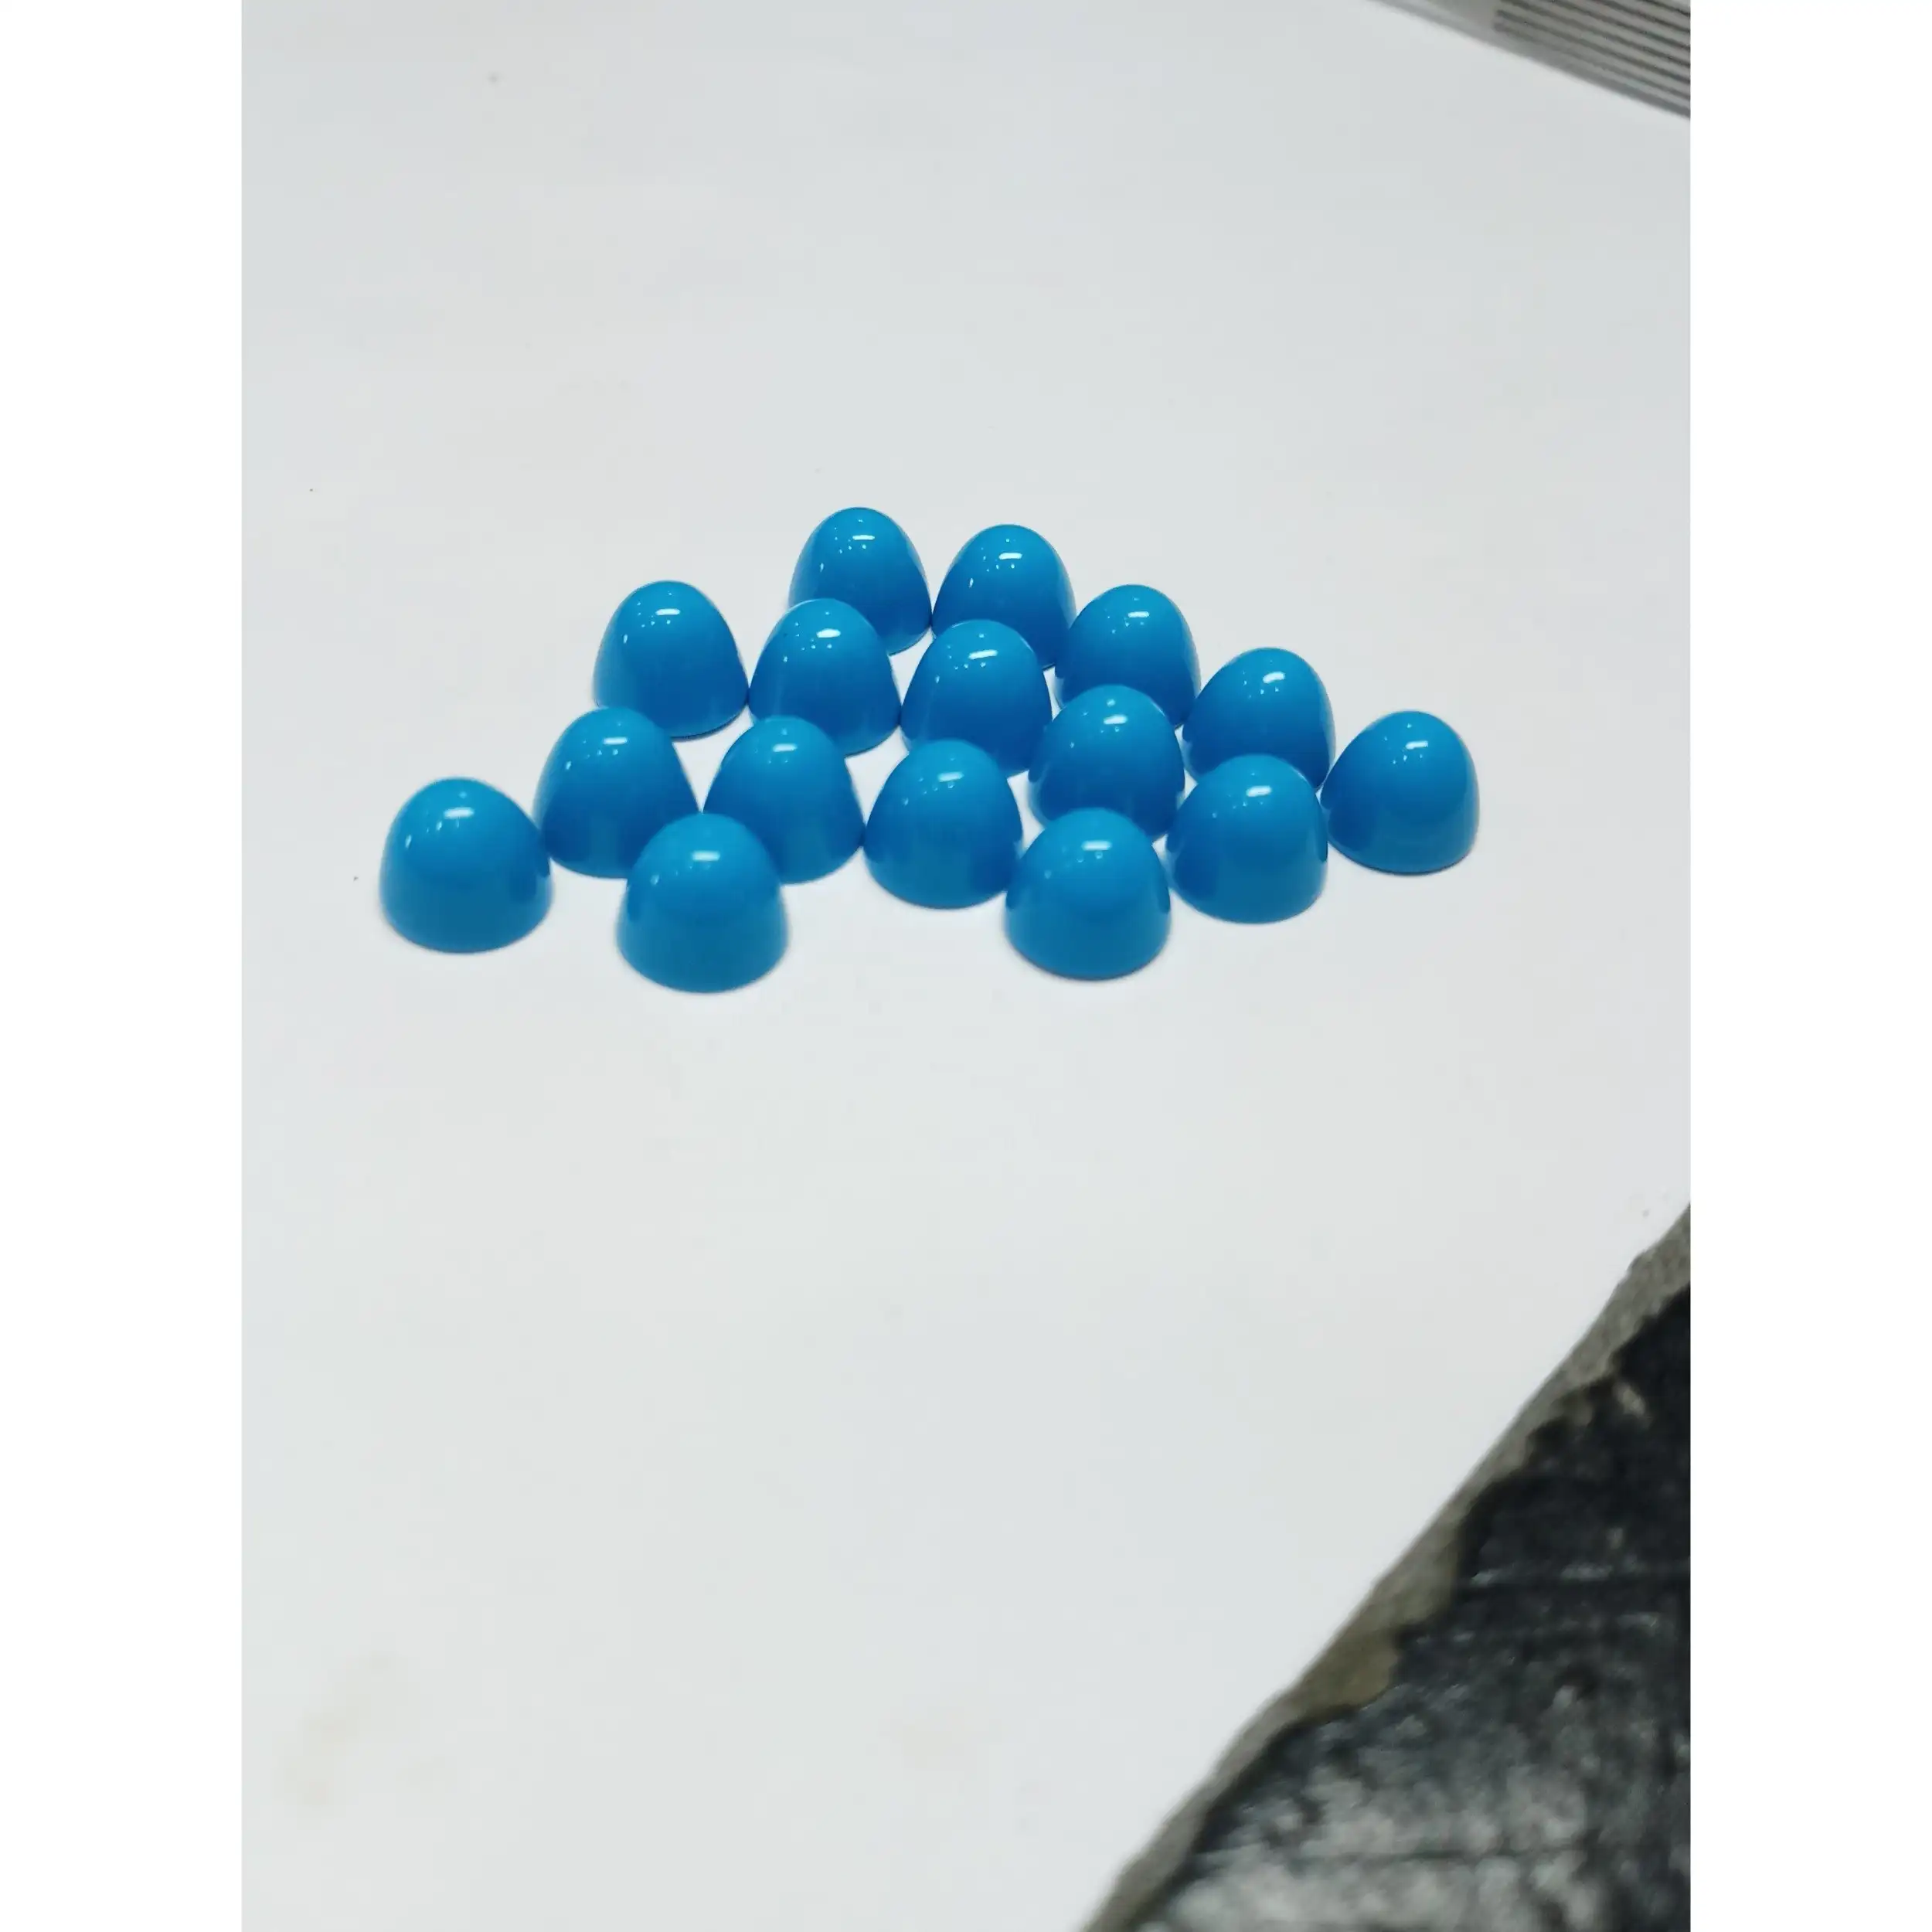 8.5mm Round Diameter Synthetic Turquoise Smooth Loose Cabochon Bullet Shape Gemstone For Making Bangles Jewellery